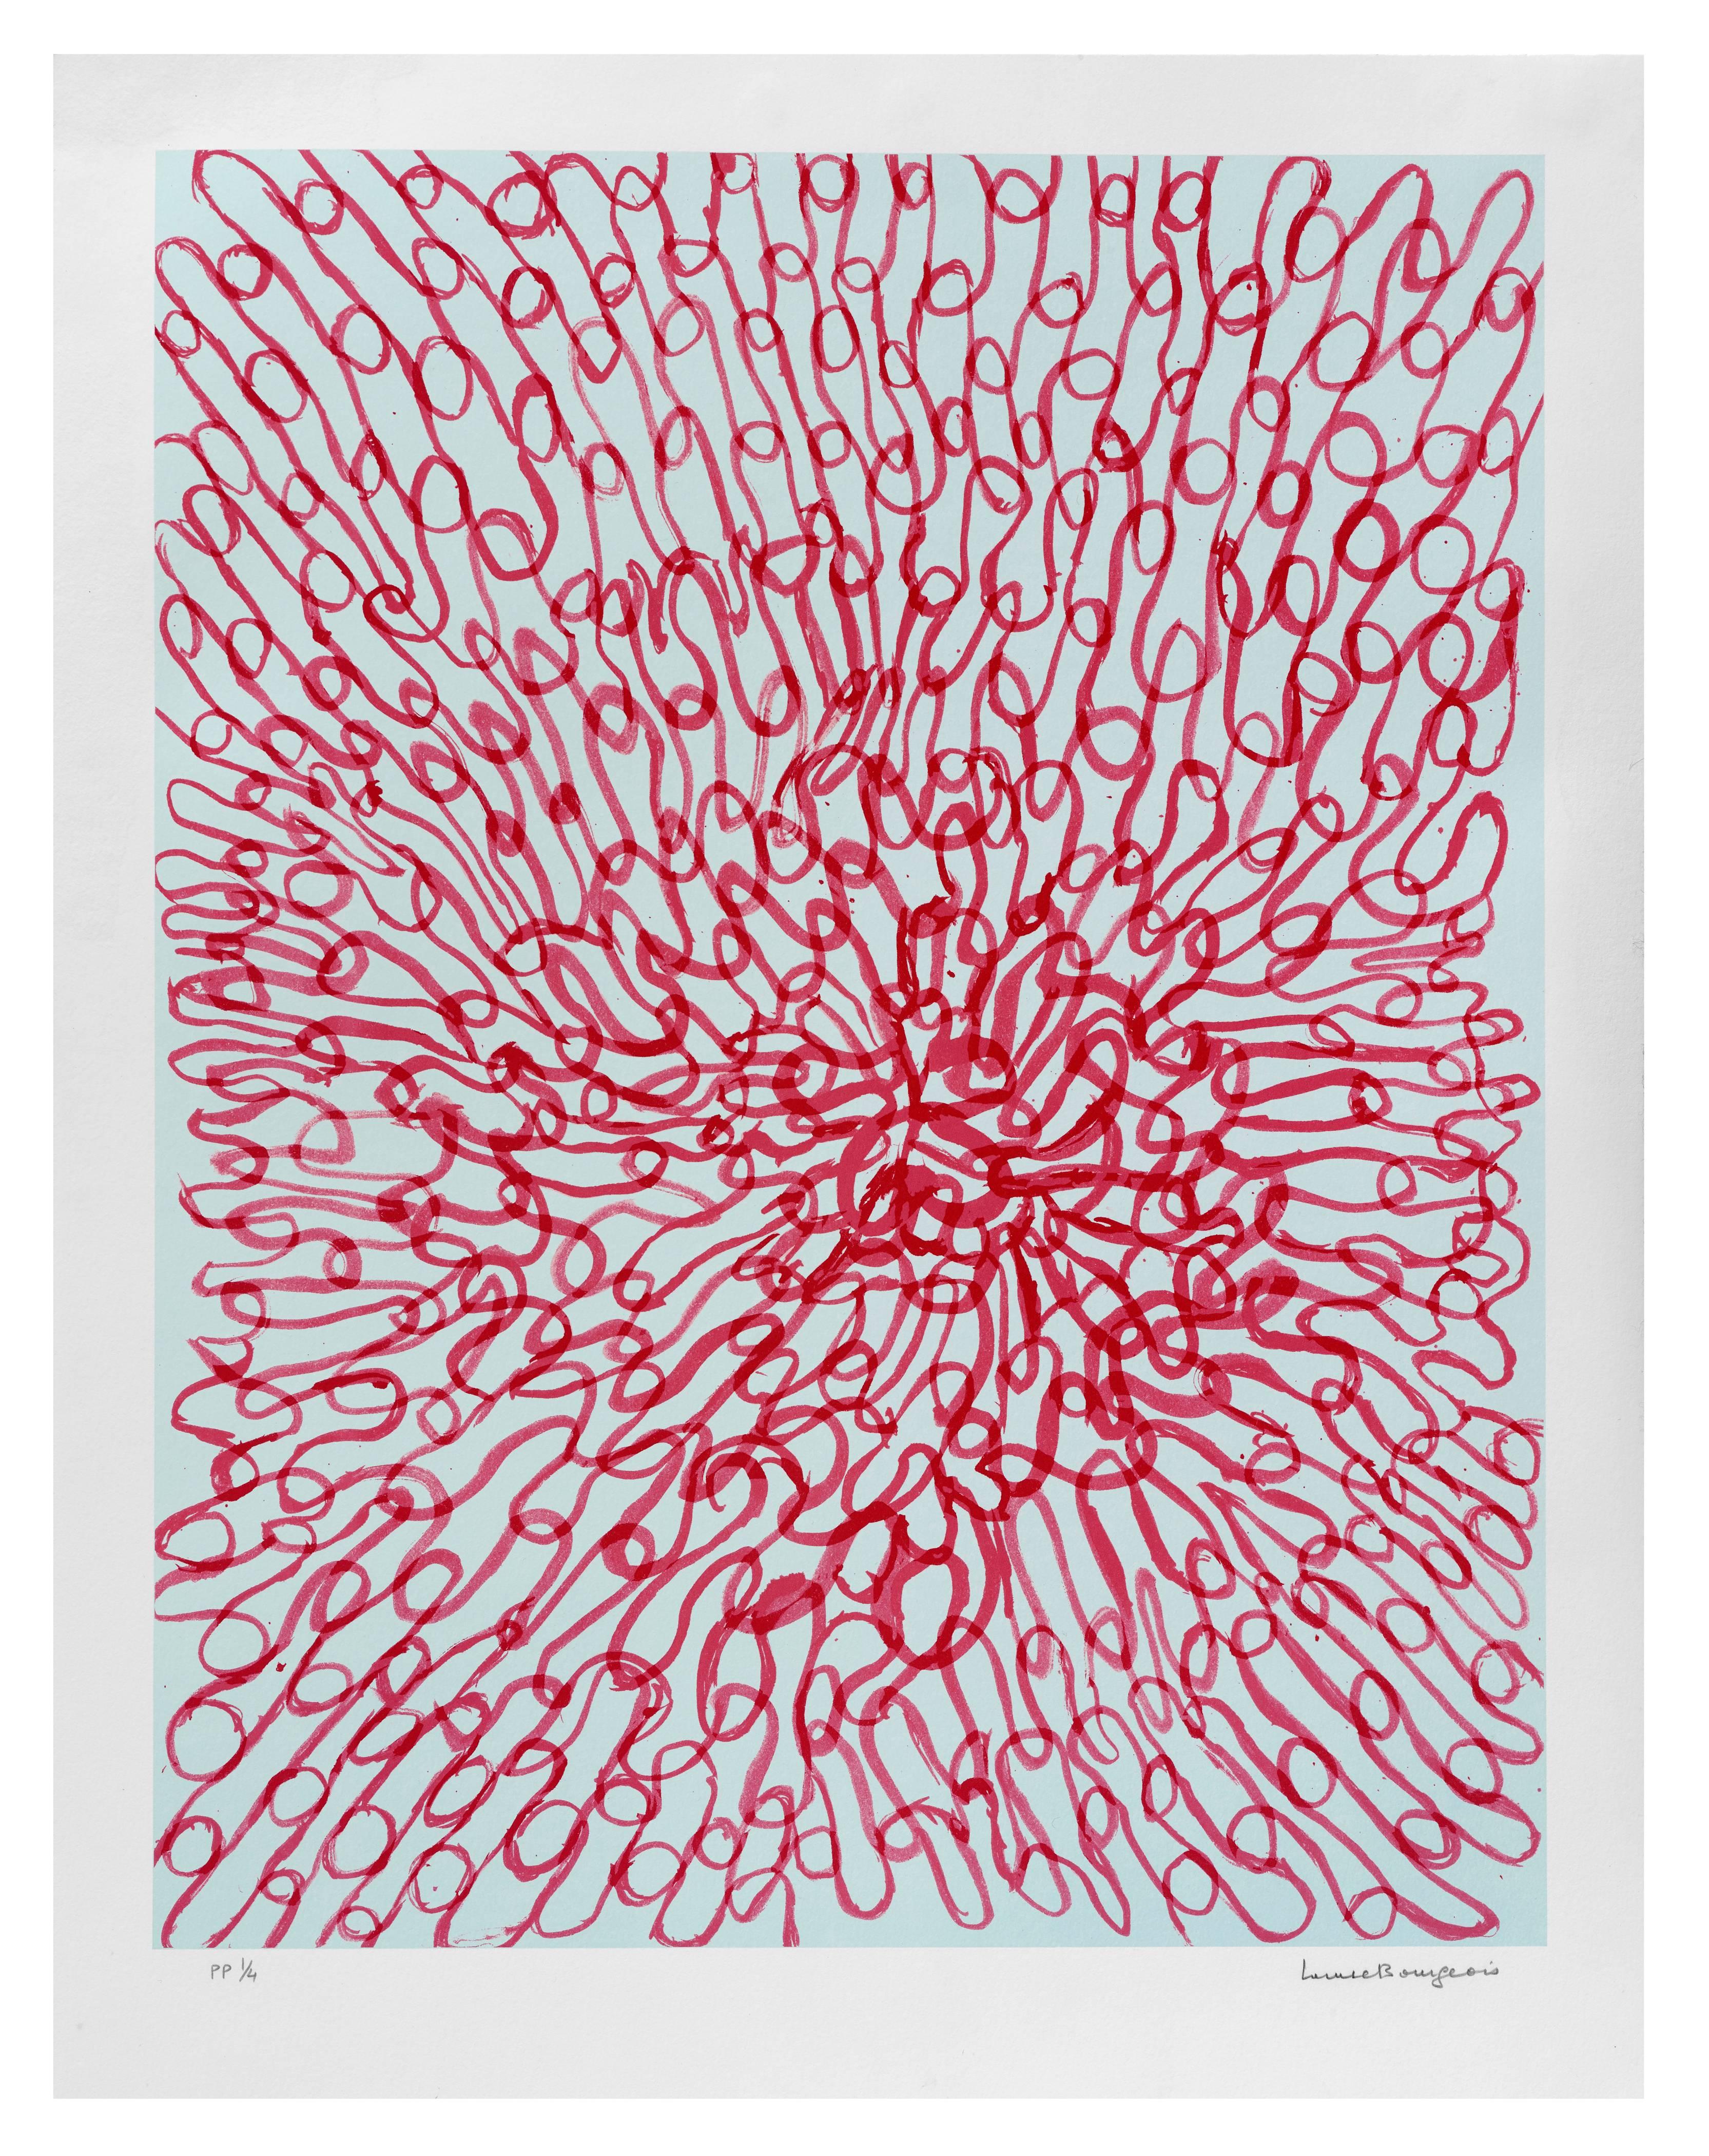 Insomnia - Print by Louise Bourgeois